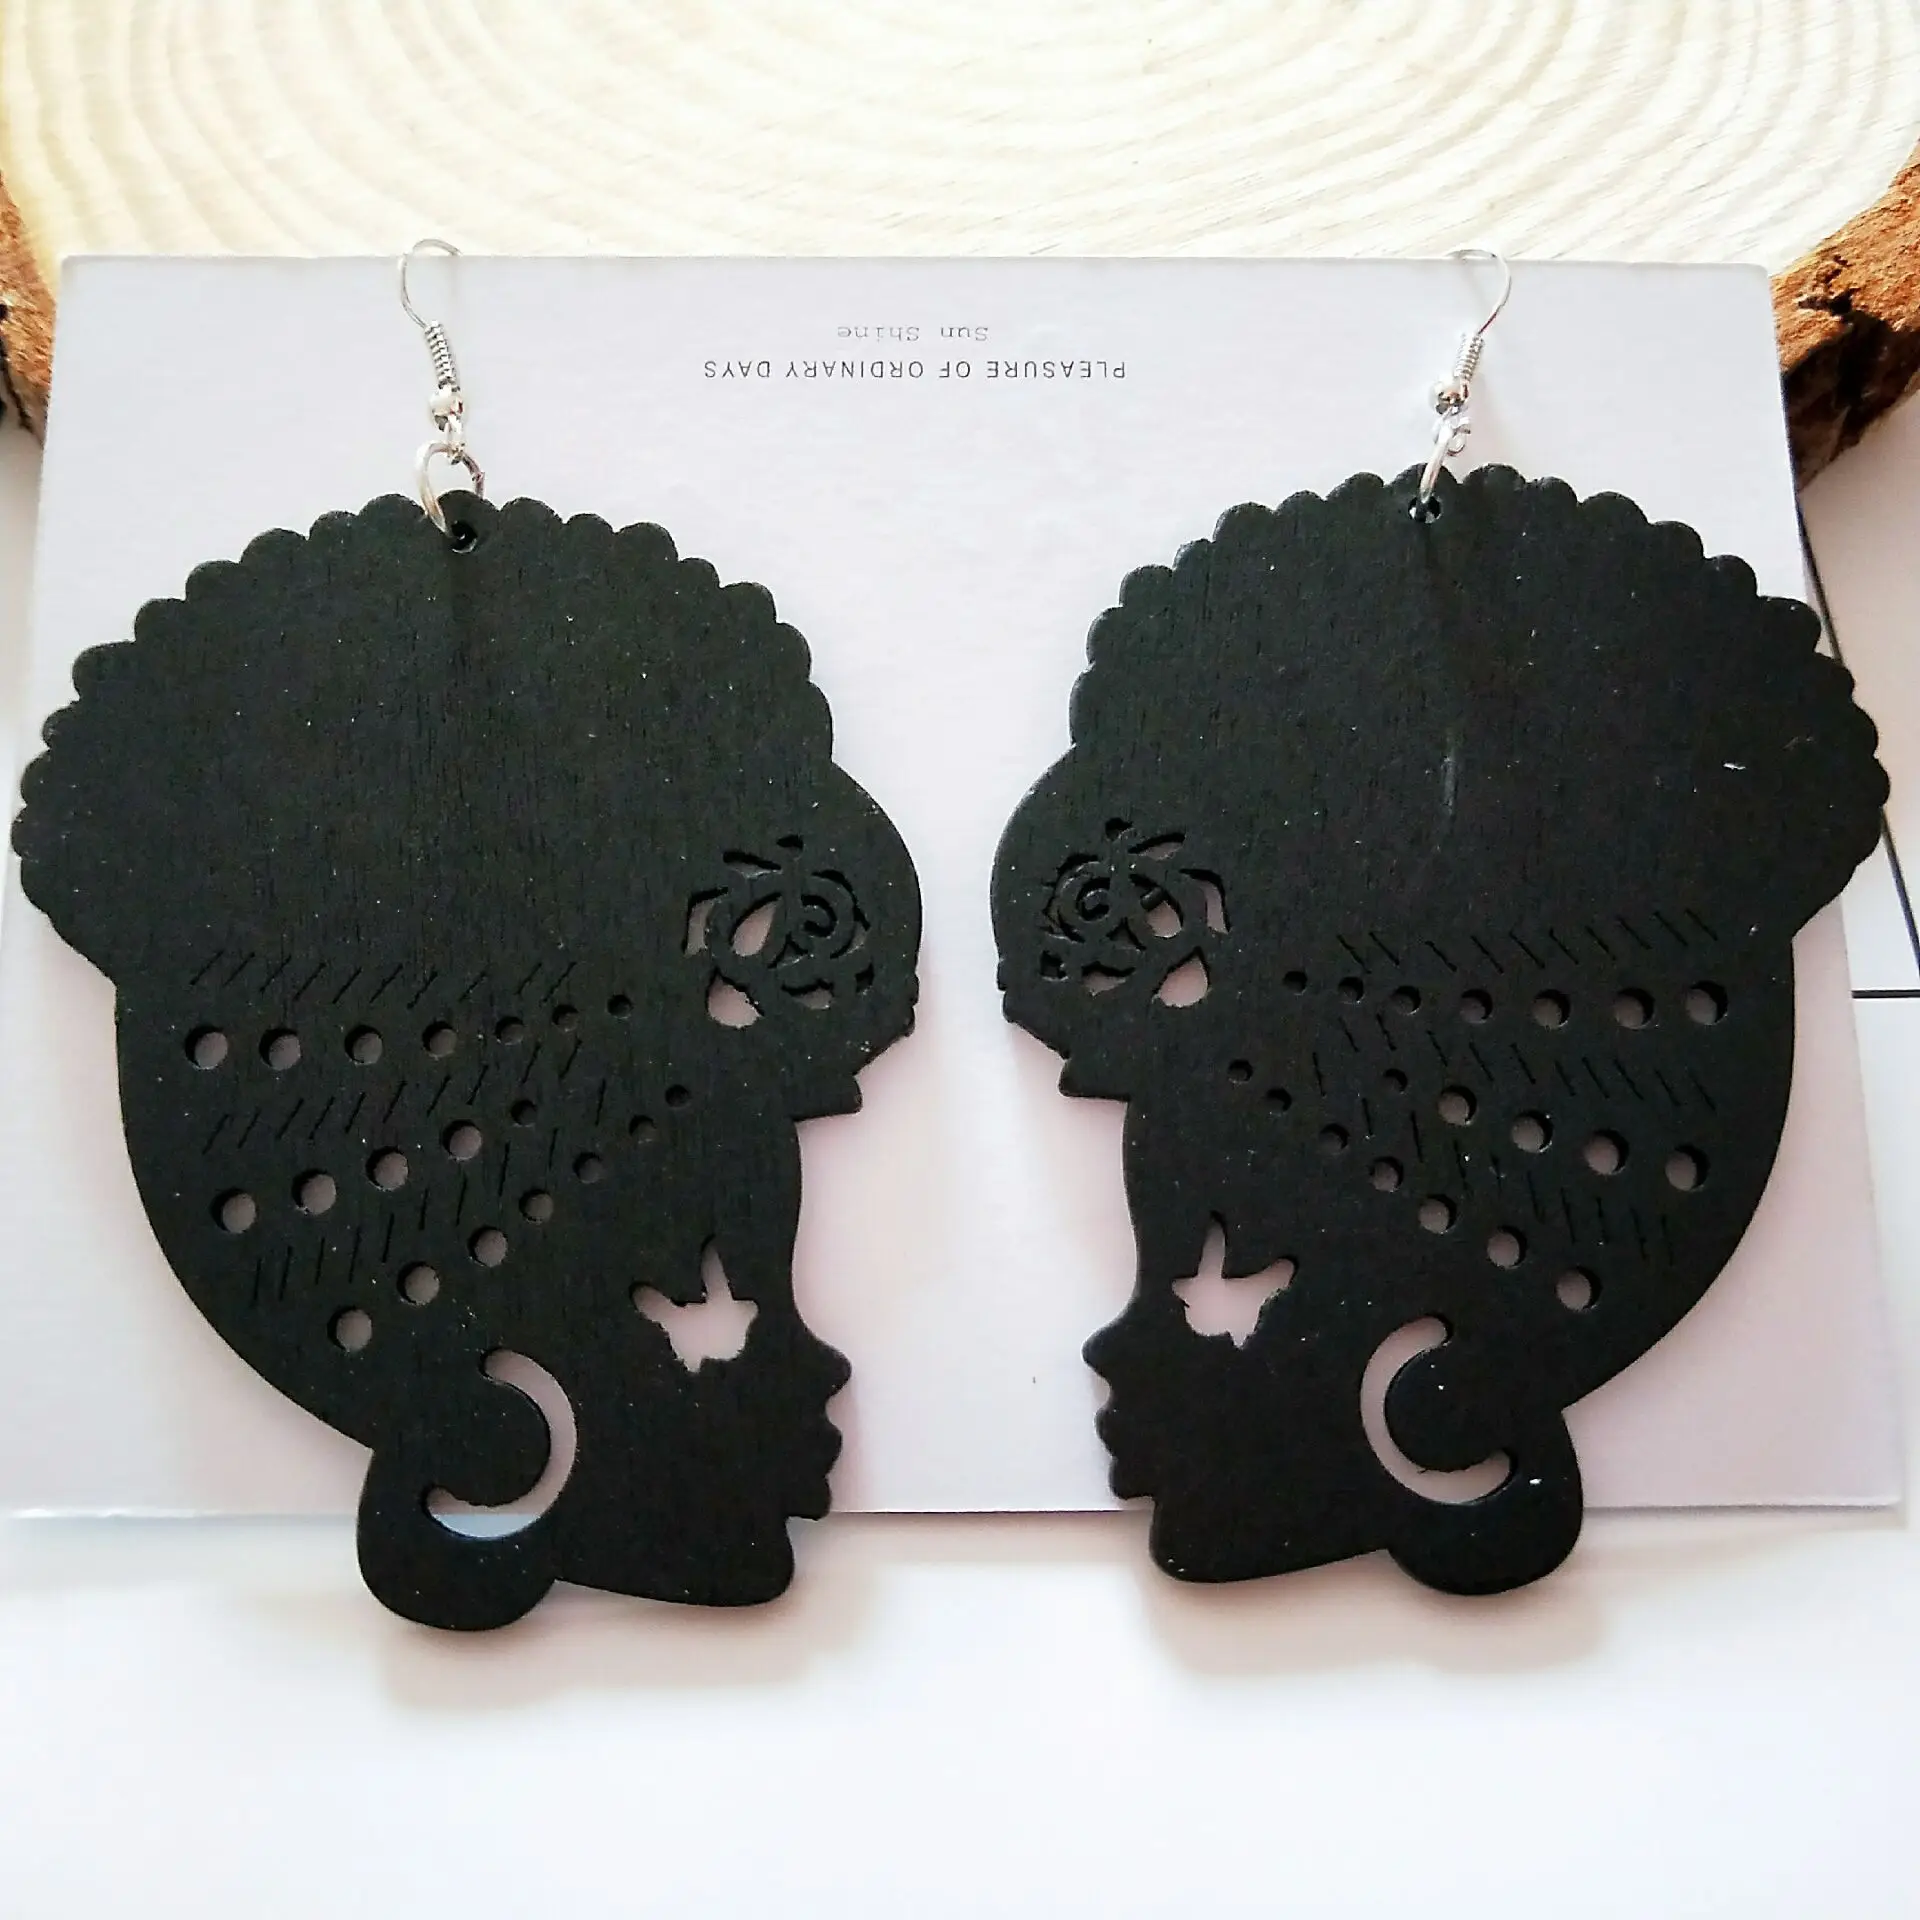 Tribal Wood Black Women Pattern DIY Painting Afro Vintage Earrings Brincos Wooden Boho African Bohemia Jewelry Party Accessory - Окраска металла: C